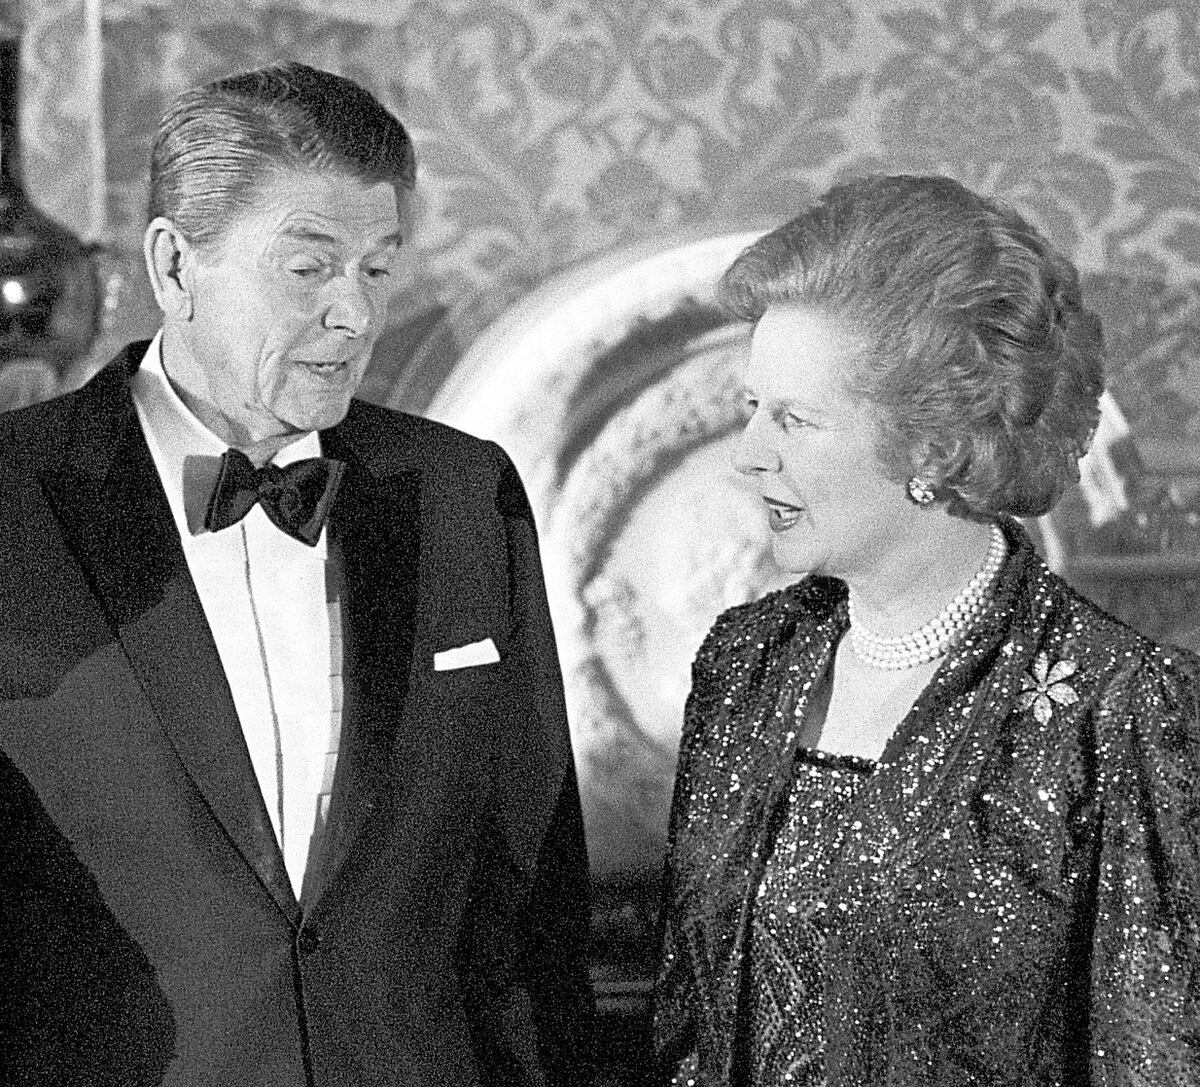 EMBARGOED TO 0001 THURSDAY DECEMBER 30File photo dated 09/06/84 of former American President Ronald Reagan and former British Prime Minister Margaret Thatcher at Buckingham Palace. British diplomats warned that Ronald Reagan lacked the ‘mental vitality’ to be an effective President of the United States, according to official papers made public today under the 30-year rule. PRESS ASSOCIATION Photo. Issue date: Thursday December 30, 2010. See PA story RECORDS Reagan. Photo credit should read: PA Wire